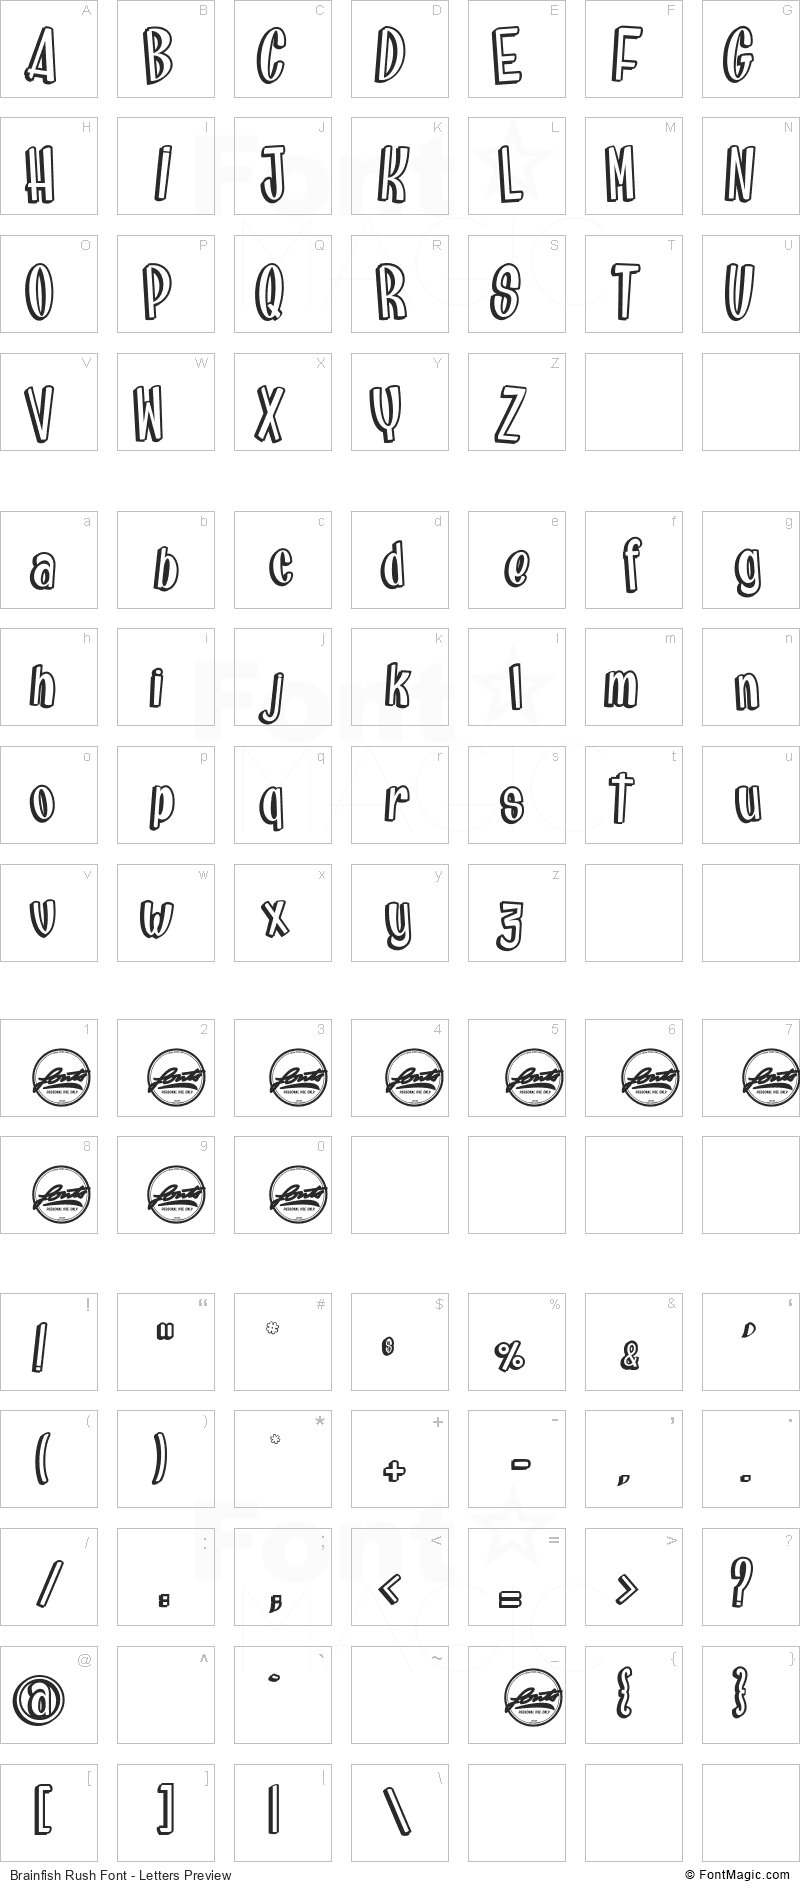 Brainfish Rush Font - All Latters Preview Chart